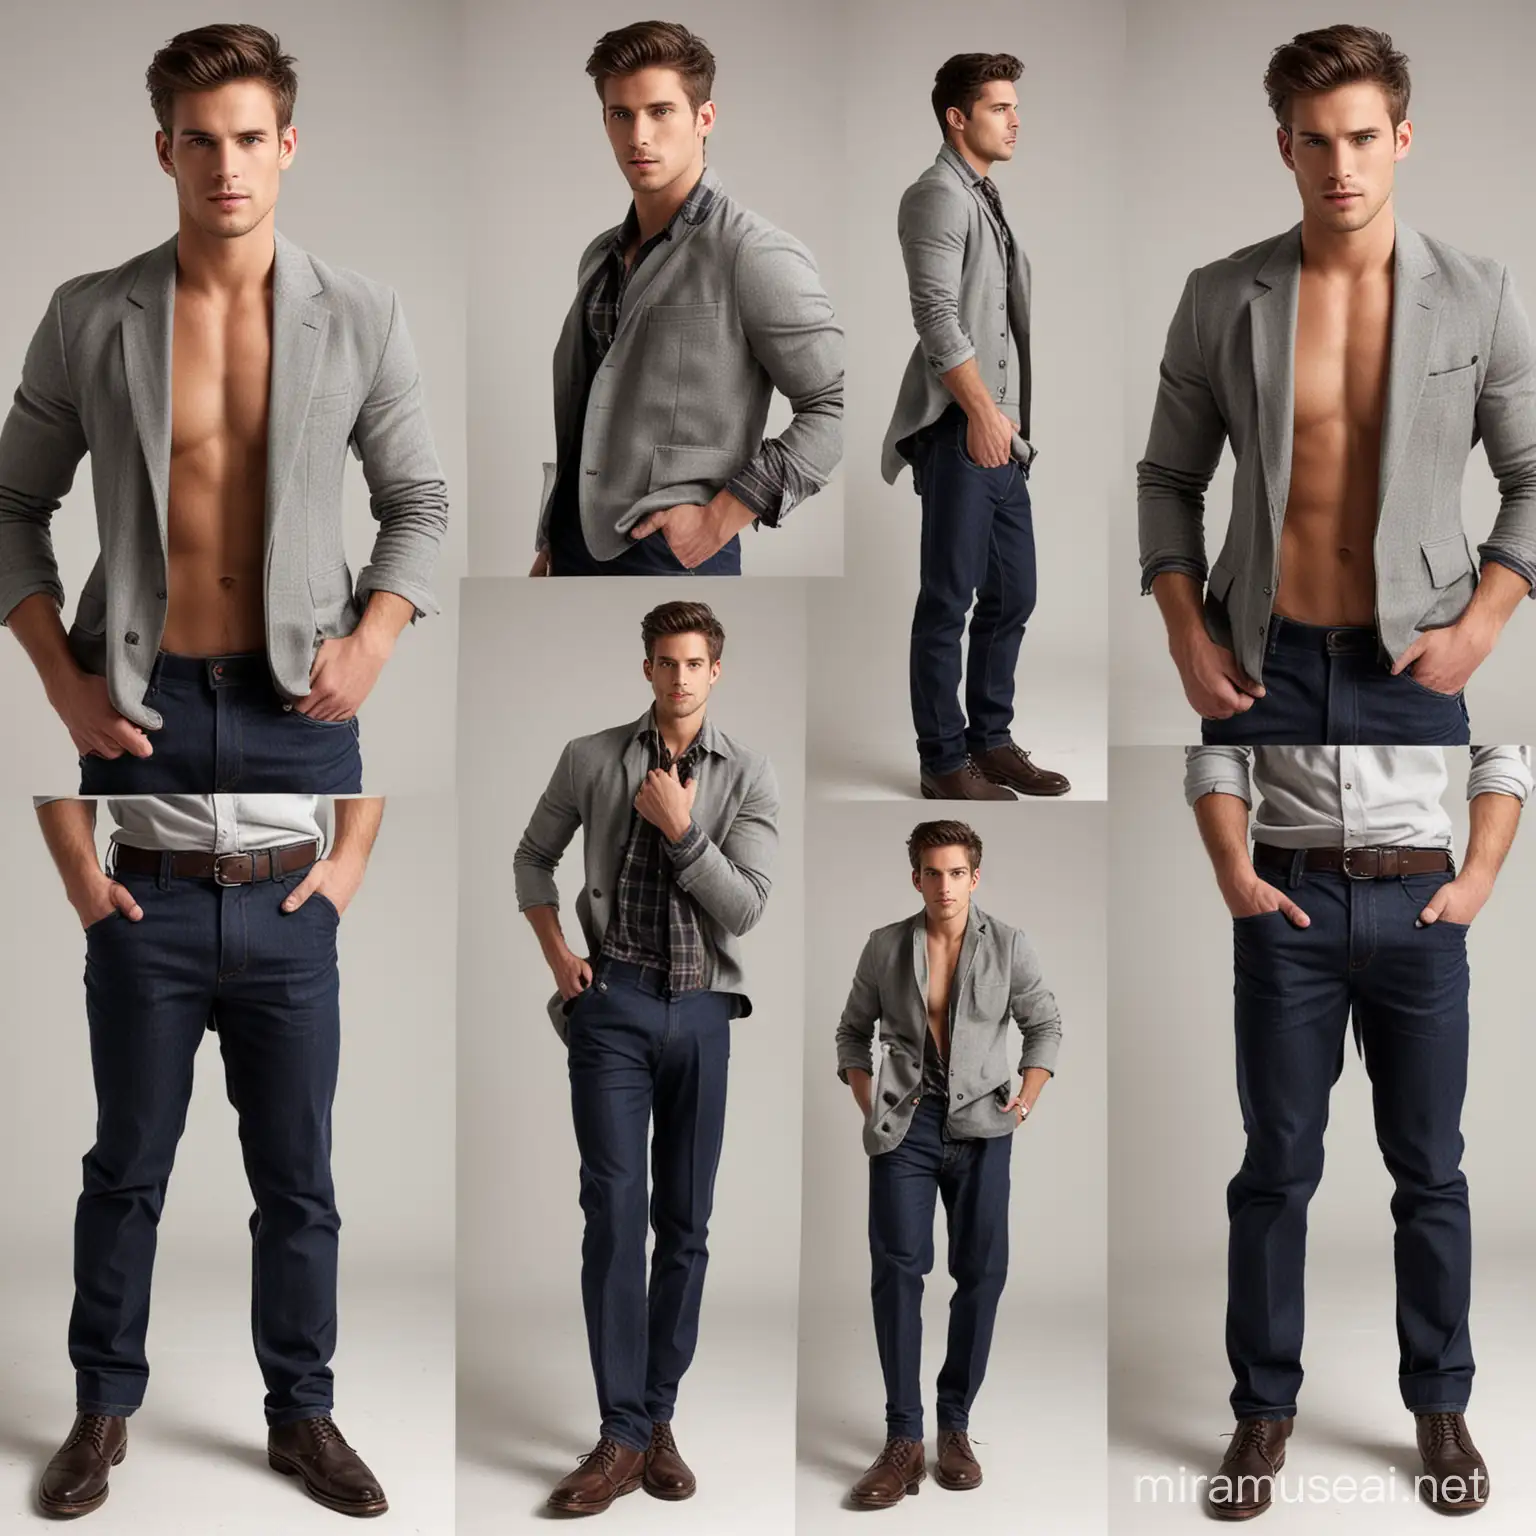 Diverse Male Model Poses Showcase Professional Photography